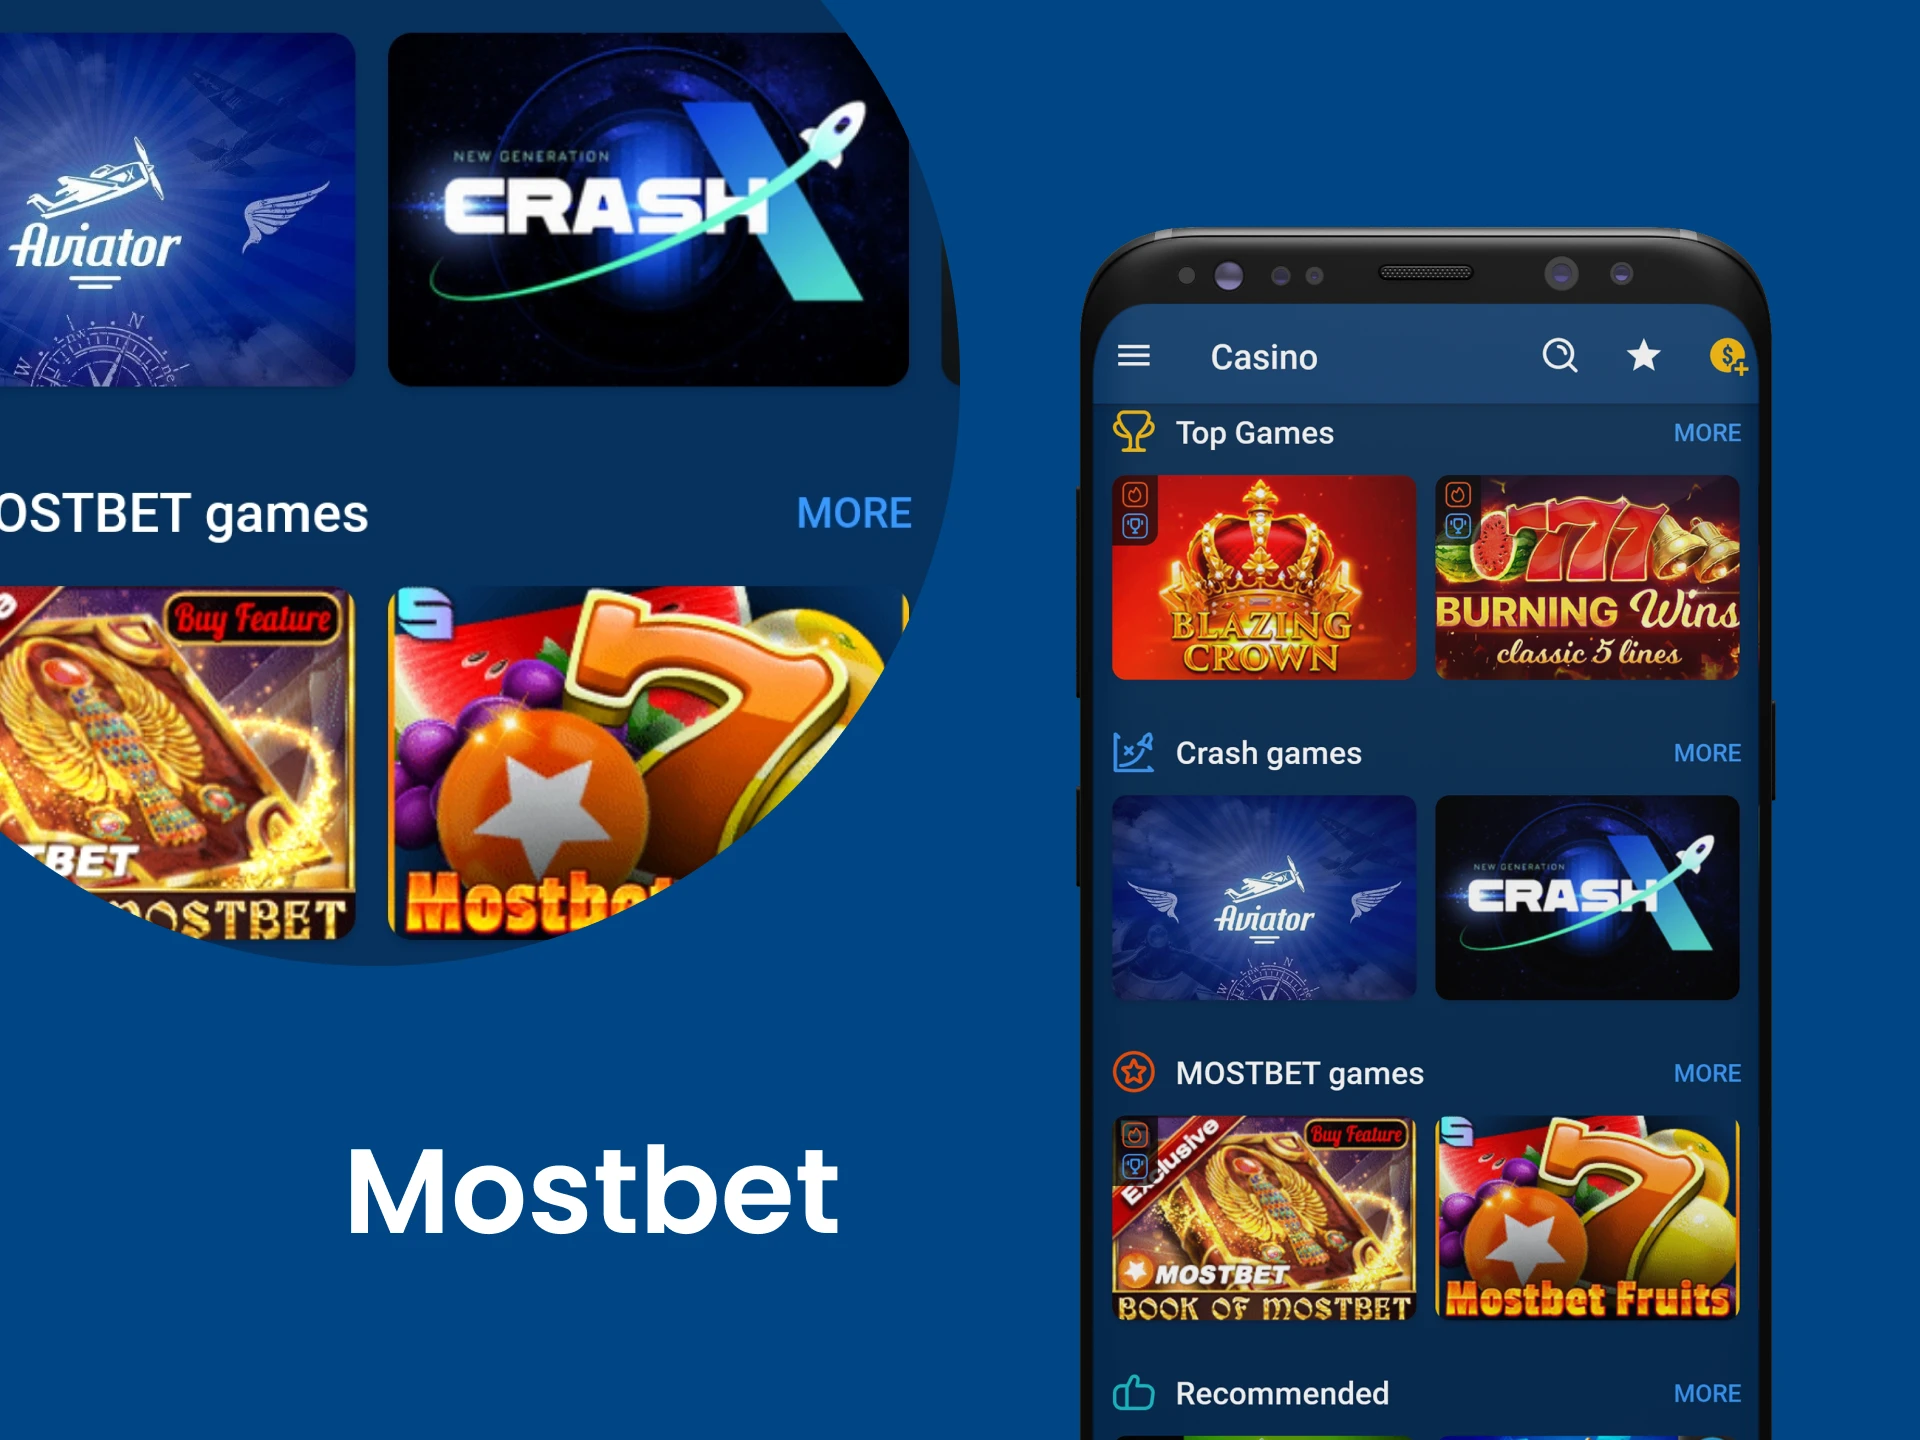 For casino games, choose Mostbet.